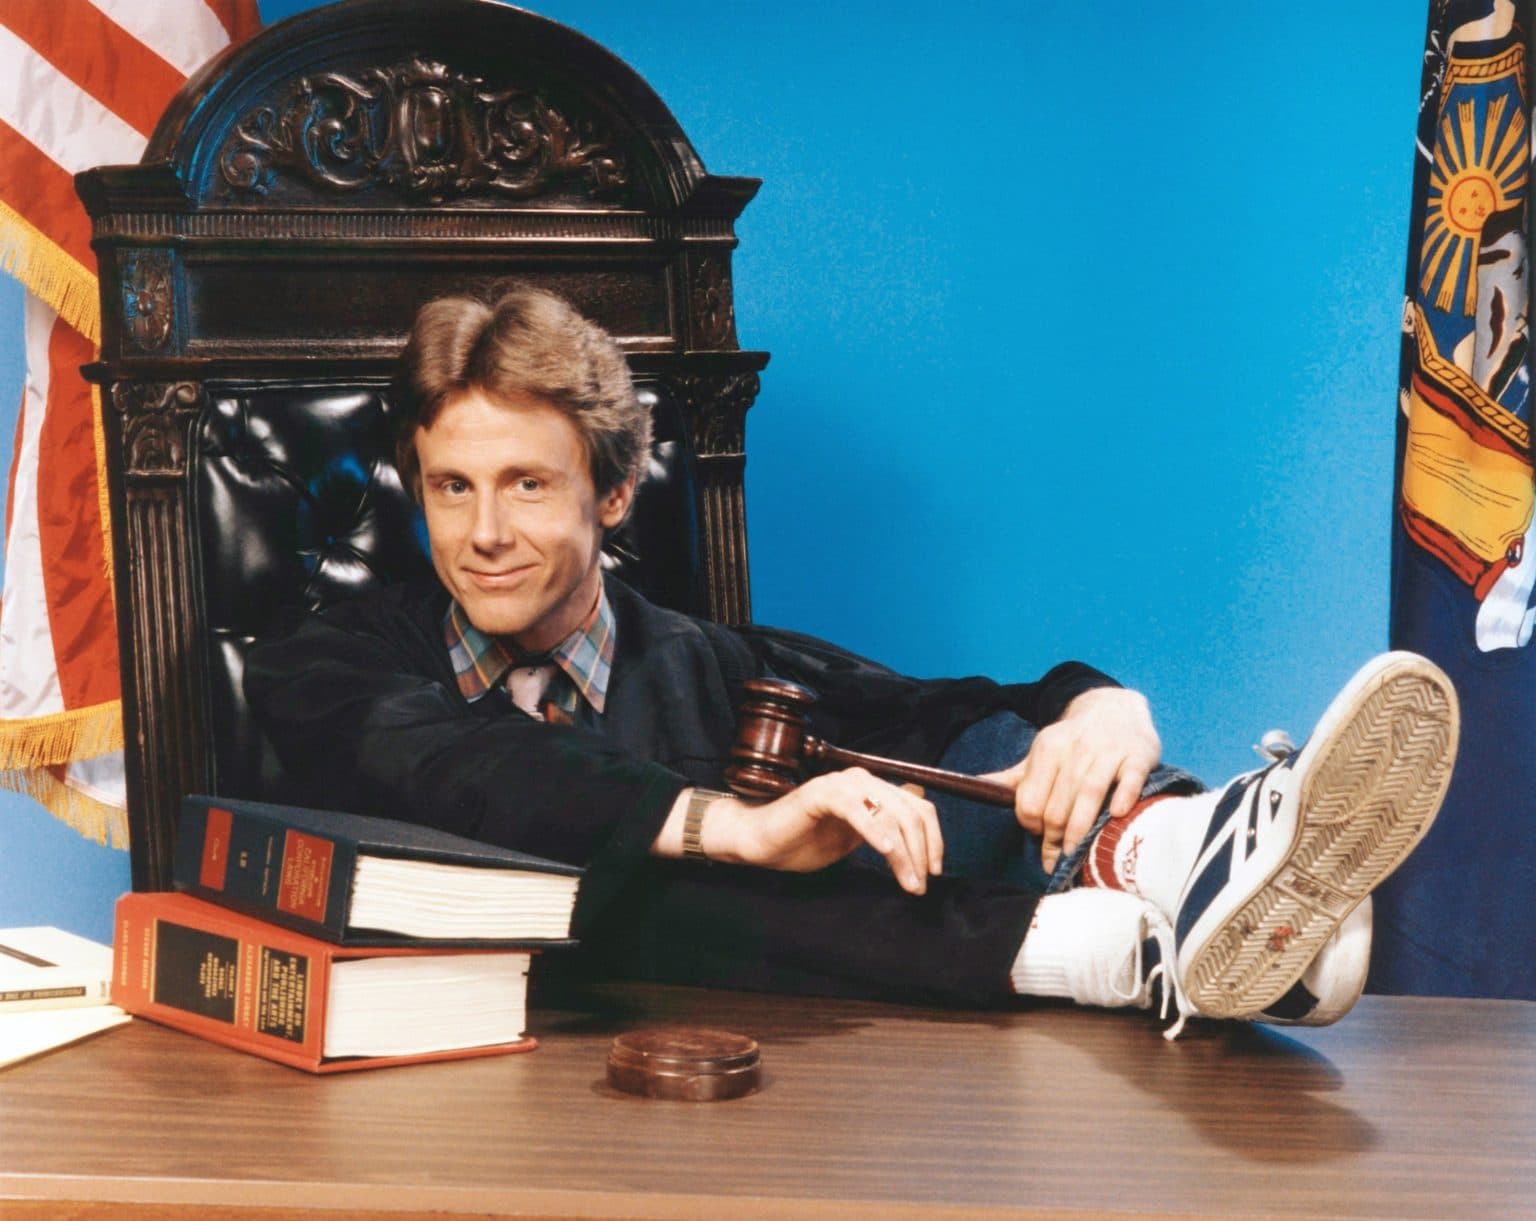 #39 Night Court #39 Reboot Coming This Fall 30 Years After Confusing Finale